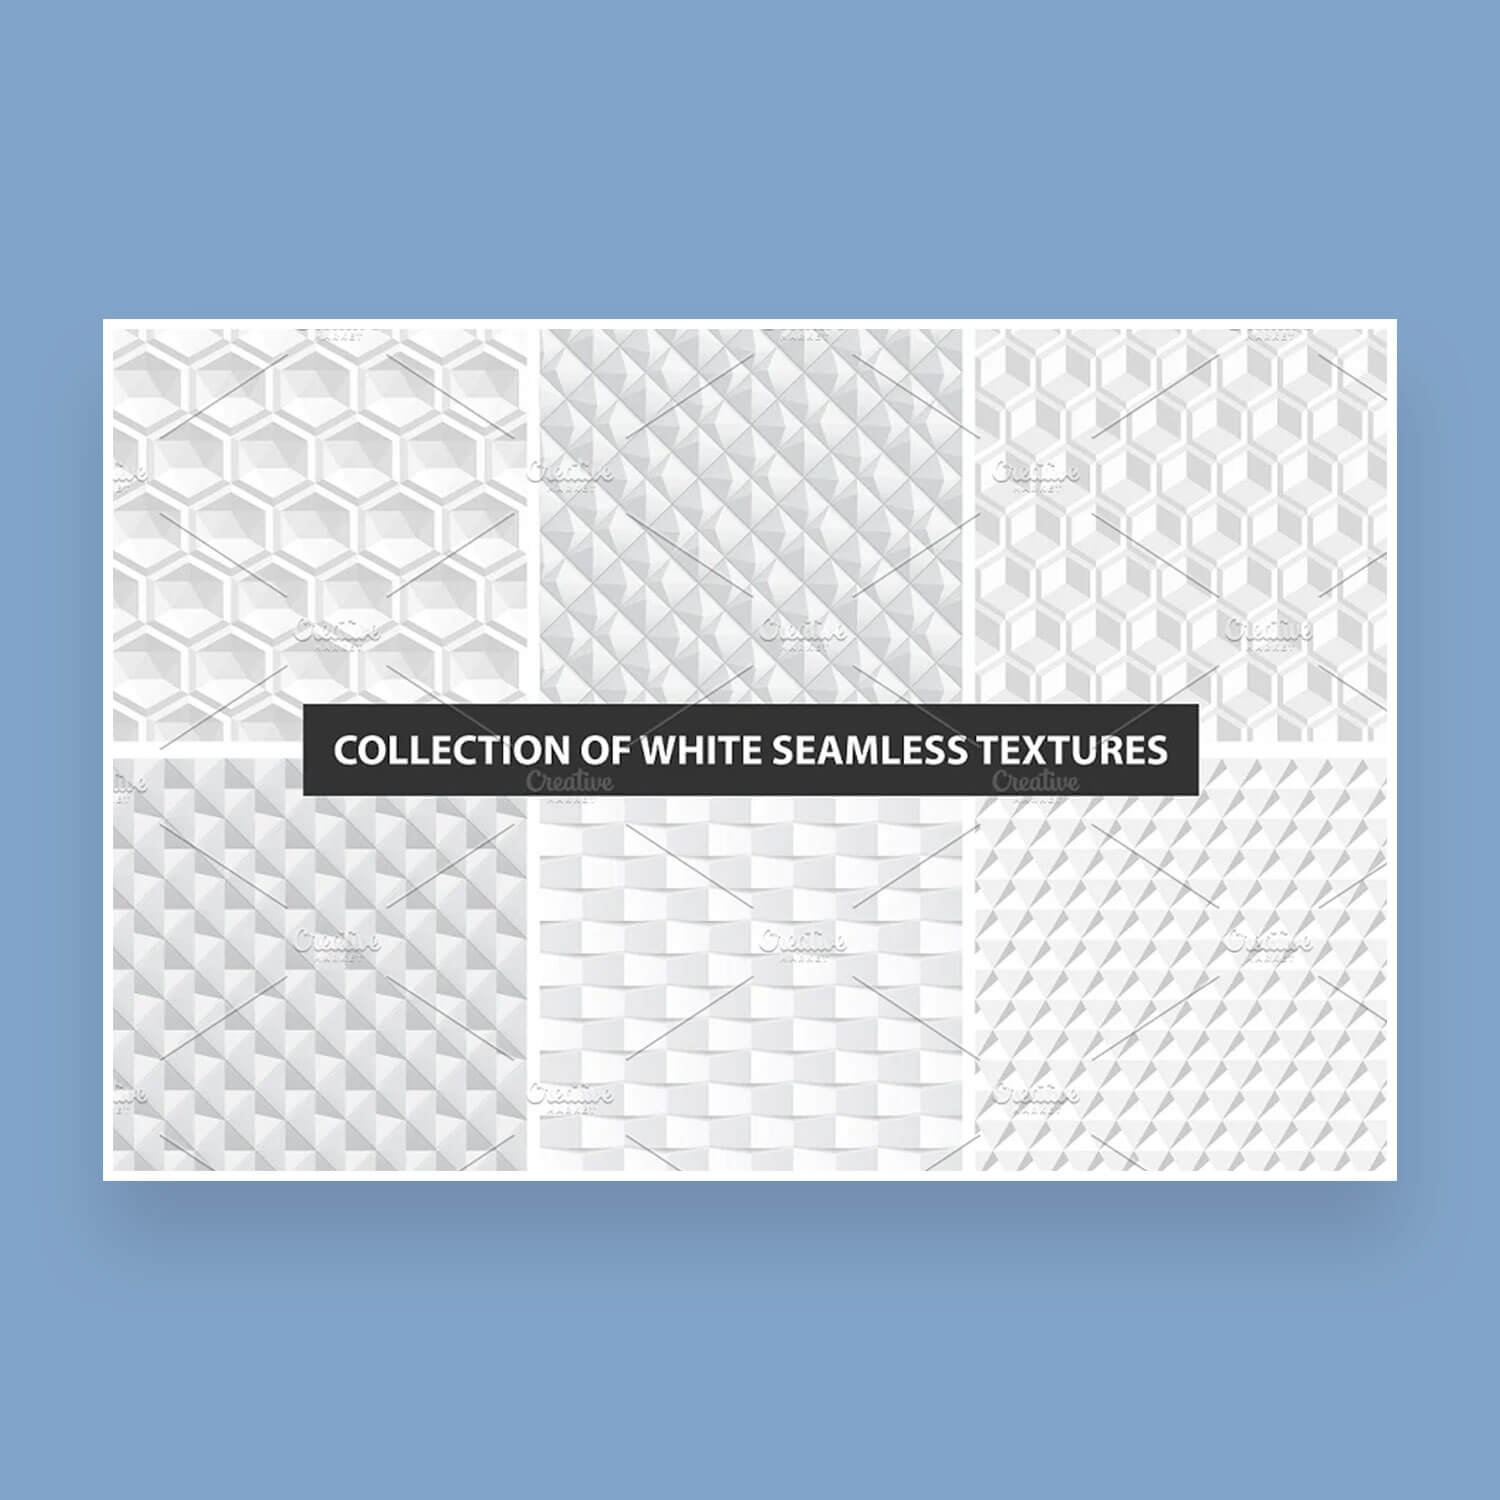 Collection of White Seamless Textures.